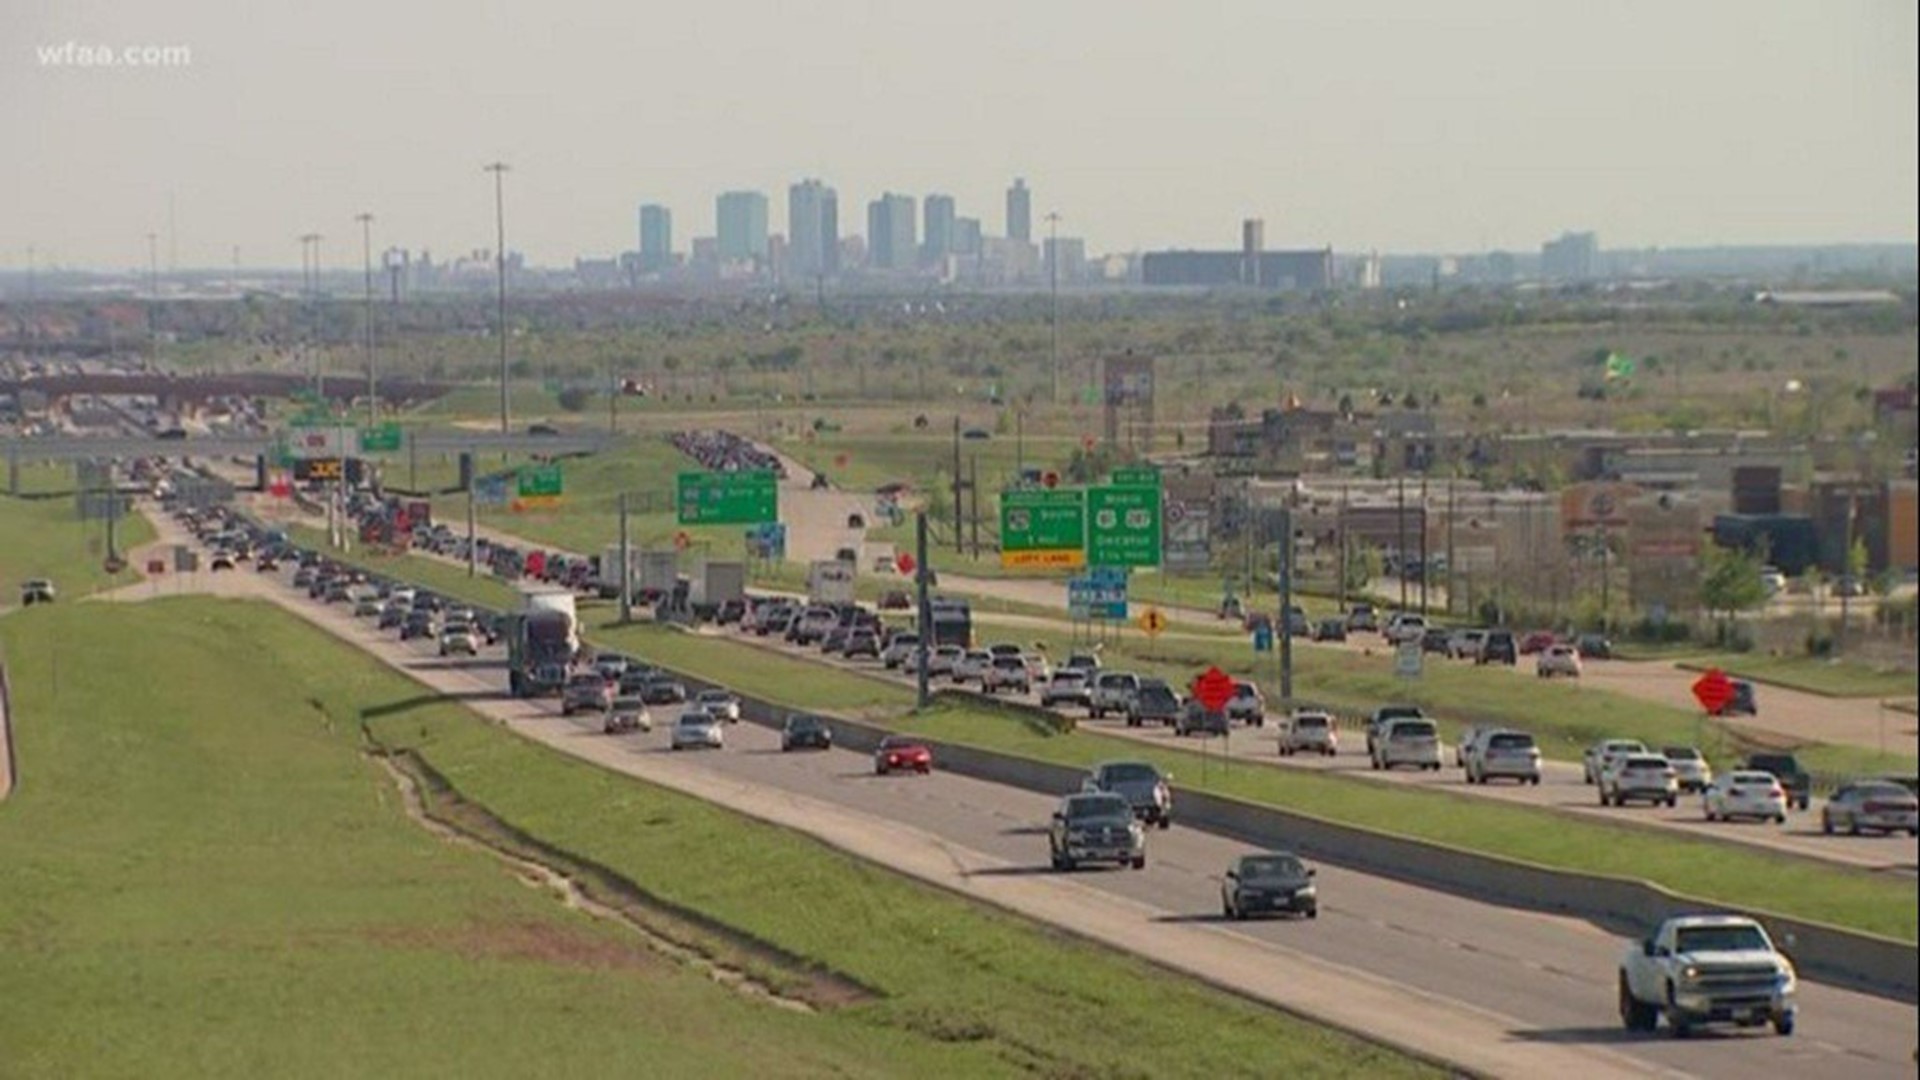 Will Fort Worth's traffic troubles finally be solved?